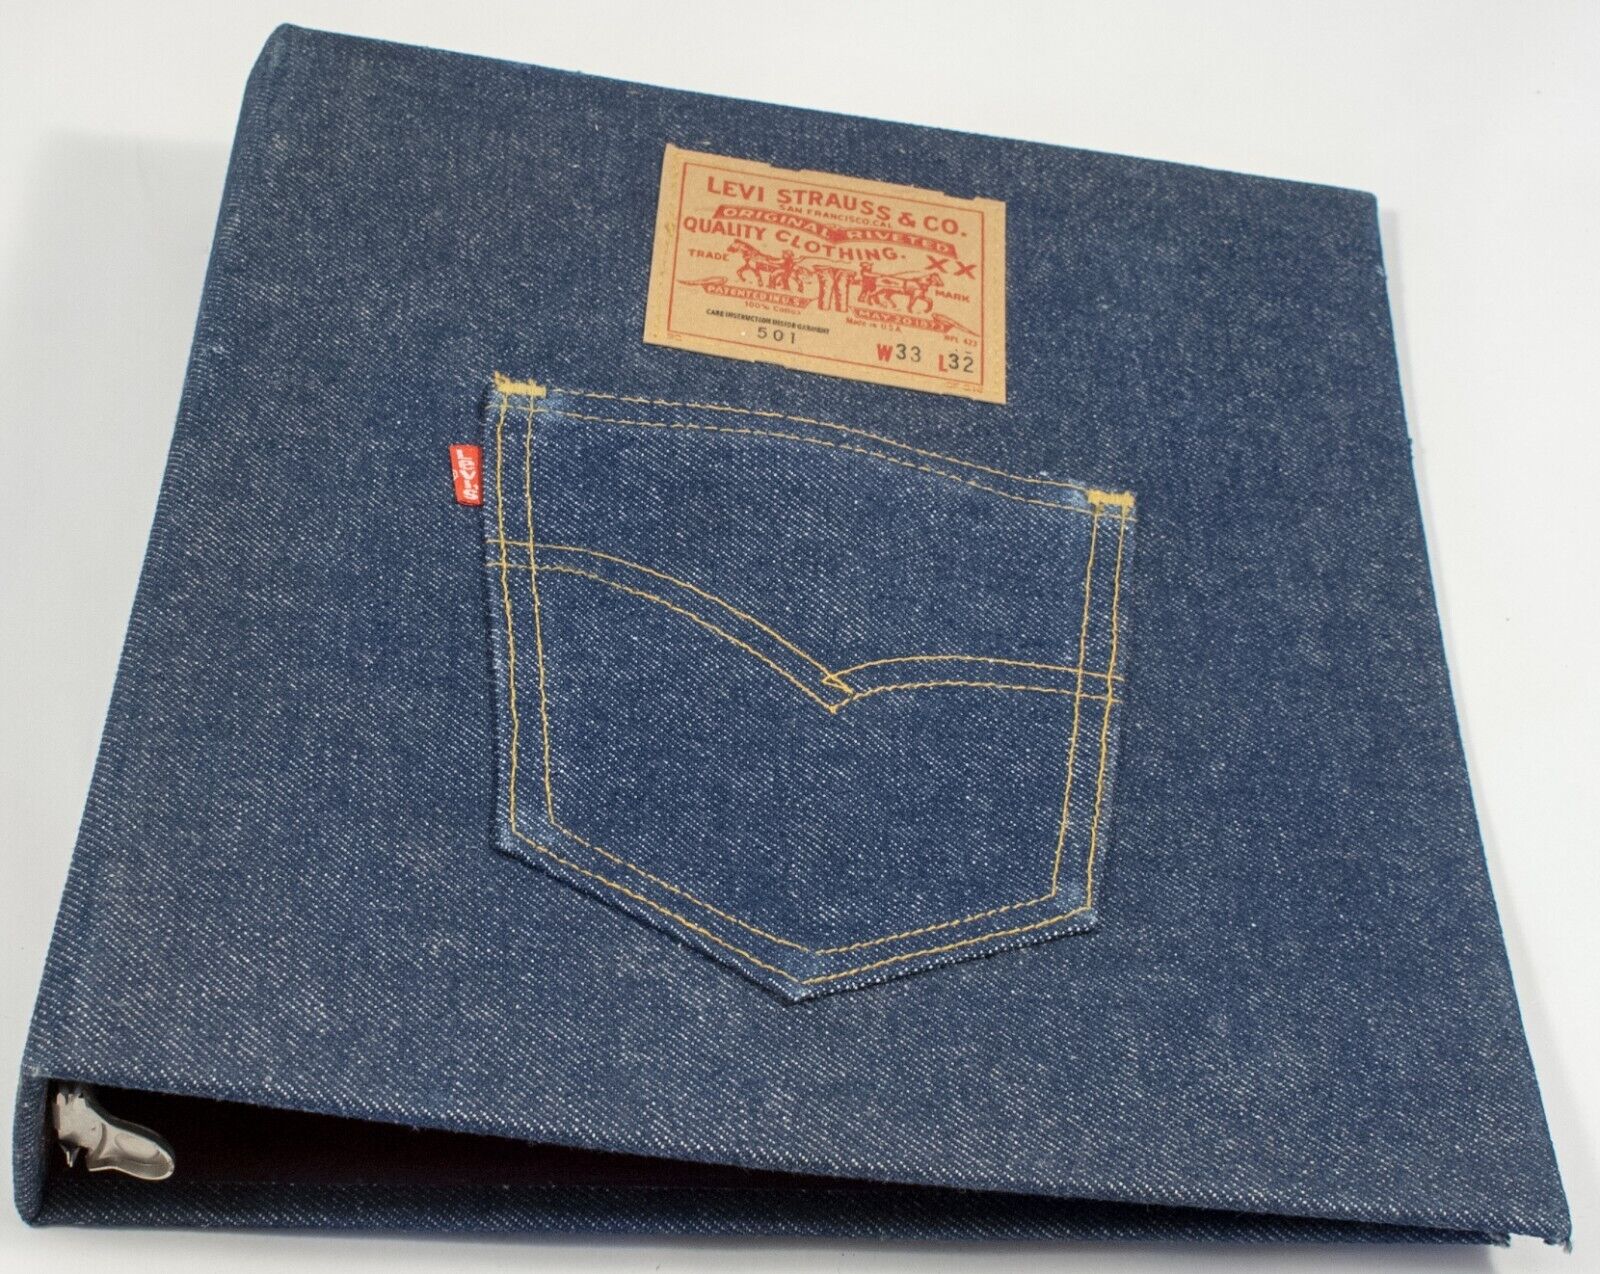 Levis 501 3 Ring Binder Pocket w/ Red Tab and Brown Tag Vintage Rare USA